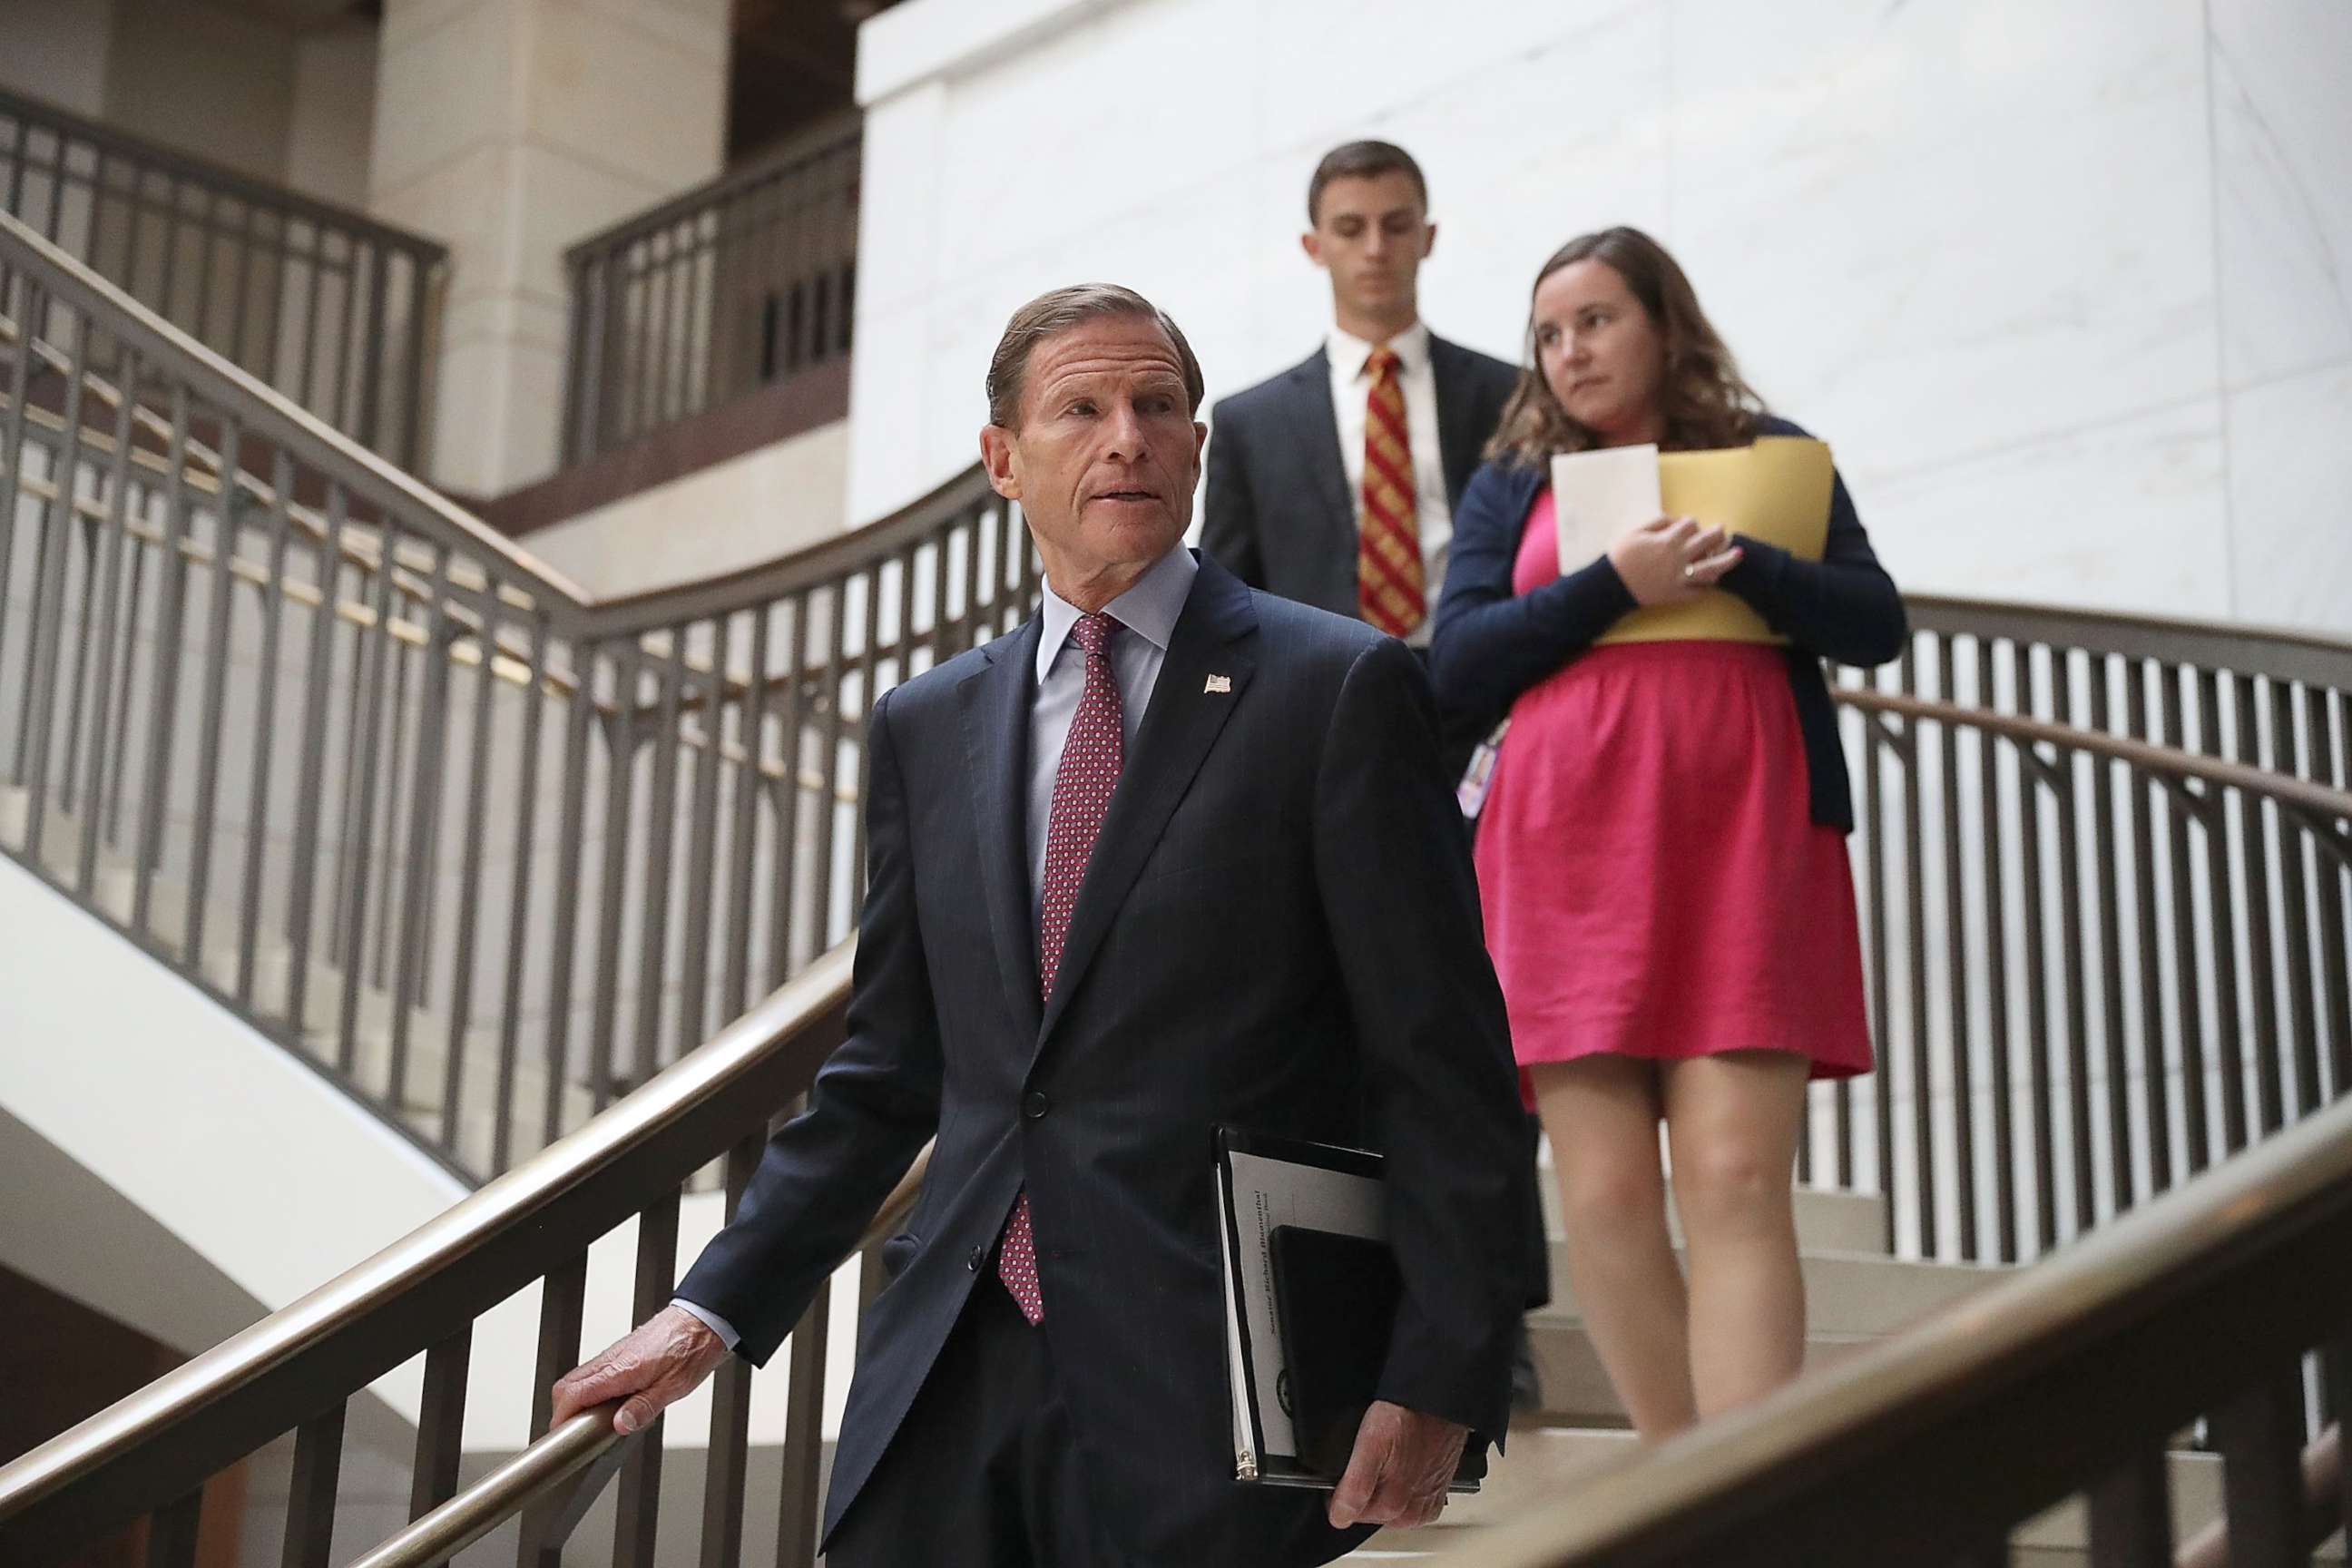 PHOTO: Sen. Richard Blumenthal (D-CT) arrives for an all-senators closed briefing on ISIL in the U.S. Capitol, on July 19, 2017, in Washington.  